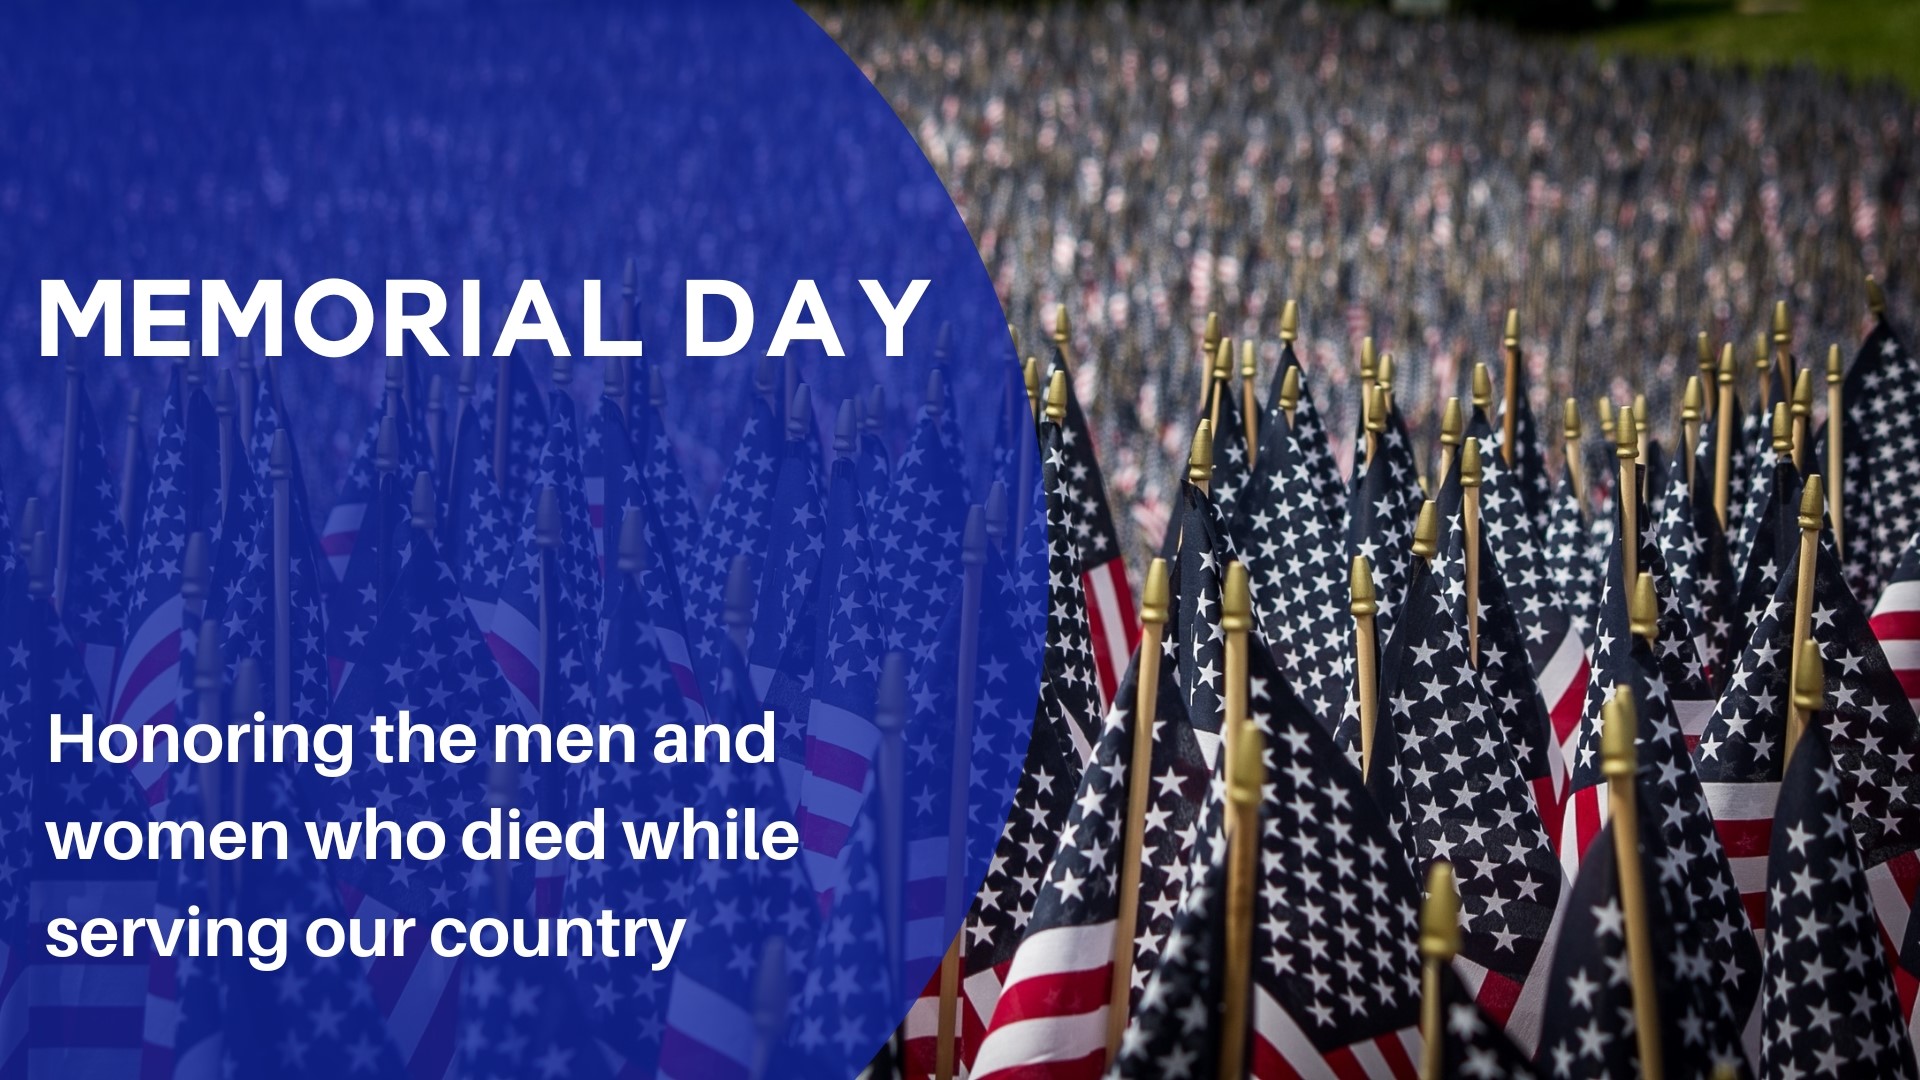 The nation honors and remembers our fallen men and women who died while serving our country.